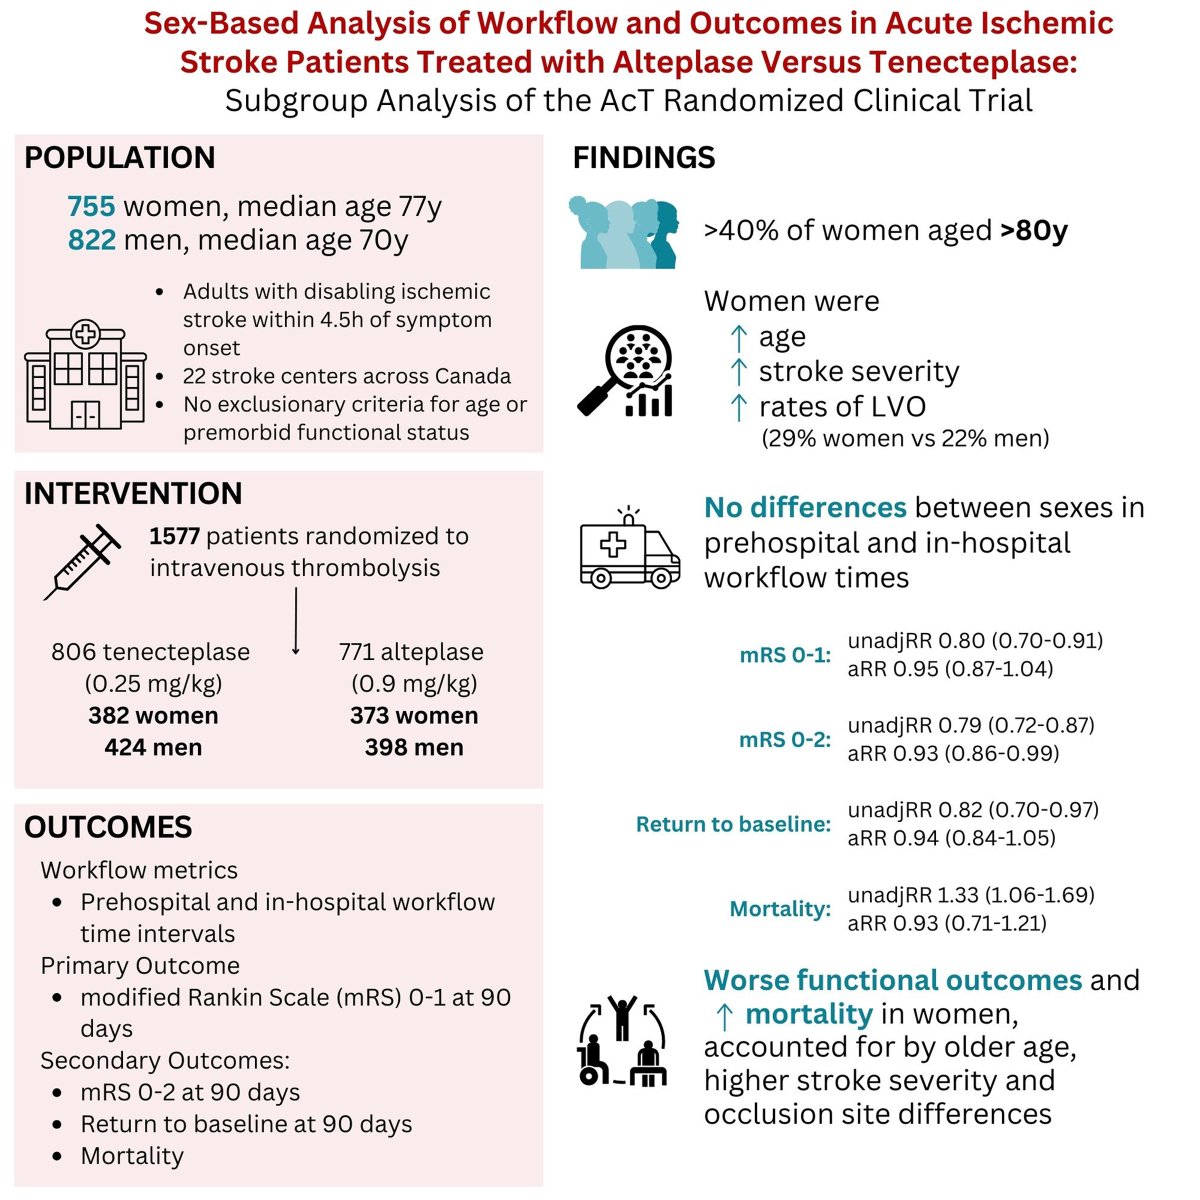 Out now!🗞️We analyzed sex differences of IV thrombolysis patients in @AcTRrct: -women are older -no differences in workflow times between sexes -women have worse outcomes and higher mortality @VancouverStroke @nishita_singh3 @AlmekhlafiMa @amyyu_md @StrokeAHA_ASA @GoRedForWomen